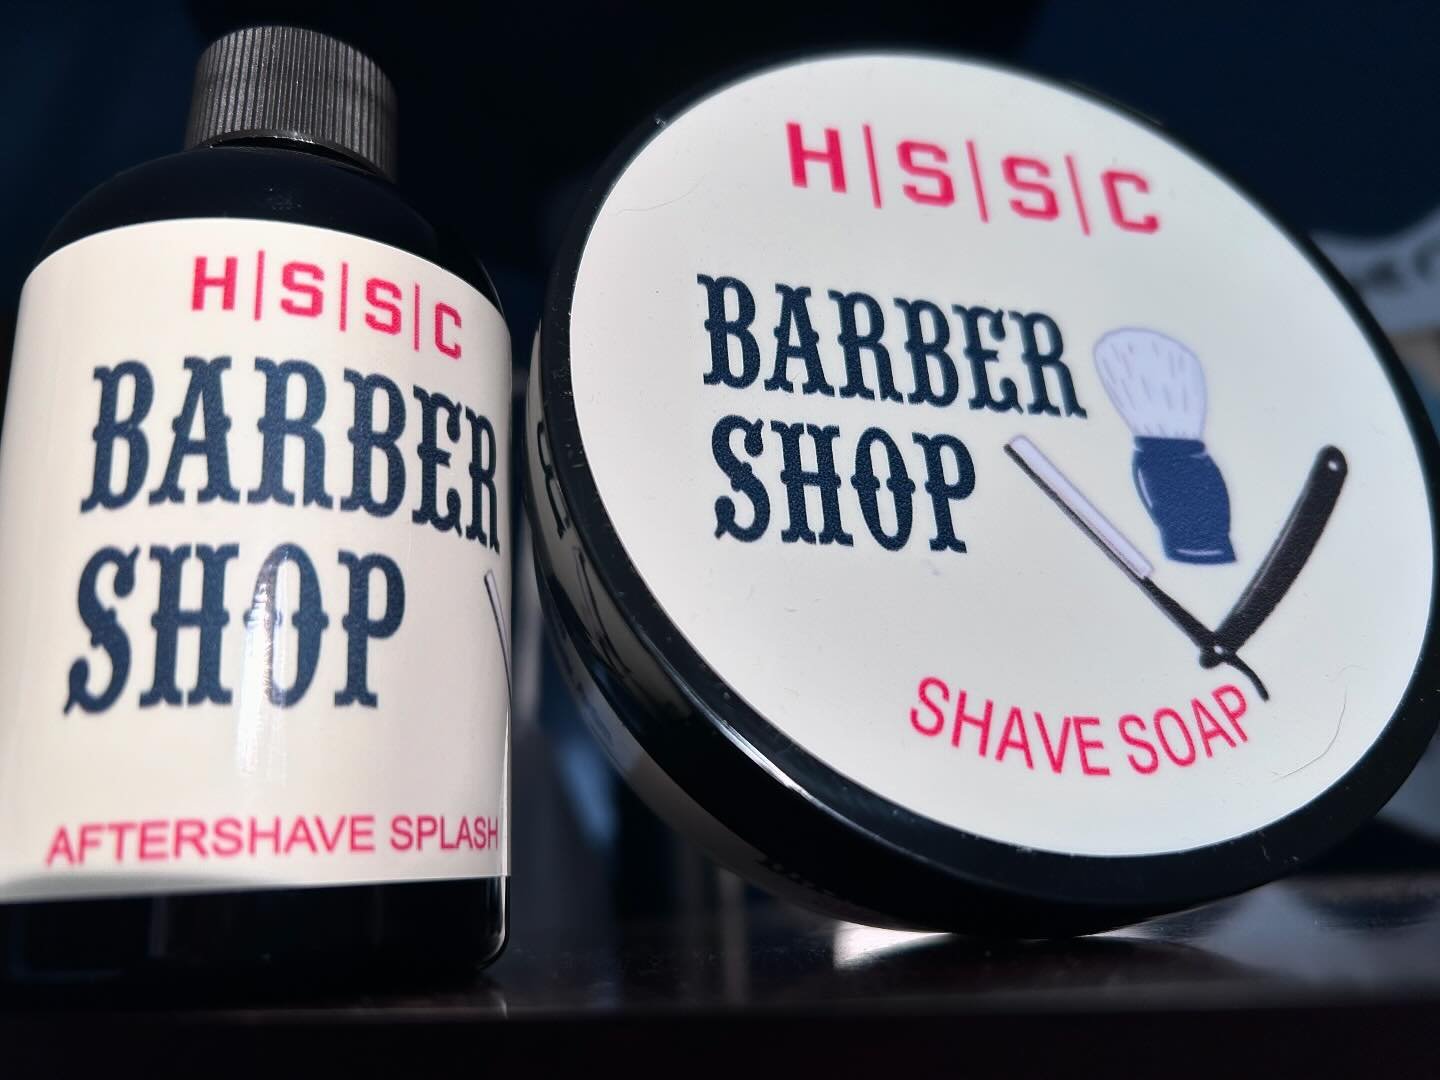 We just posted a review of @highlandspringssoap Barber Shop shave soap on creakybottombracket.com.  This soap is a lot of fun to use as it adds the experience of nostalgia. We got this soap through @stonefieldshavingco, also based in Canada. Have a r